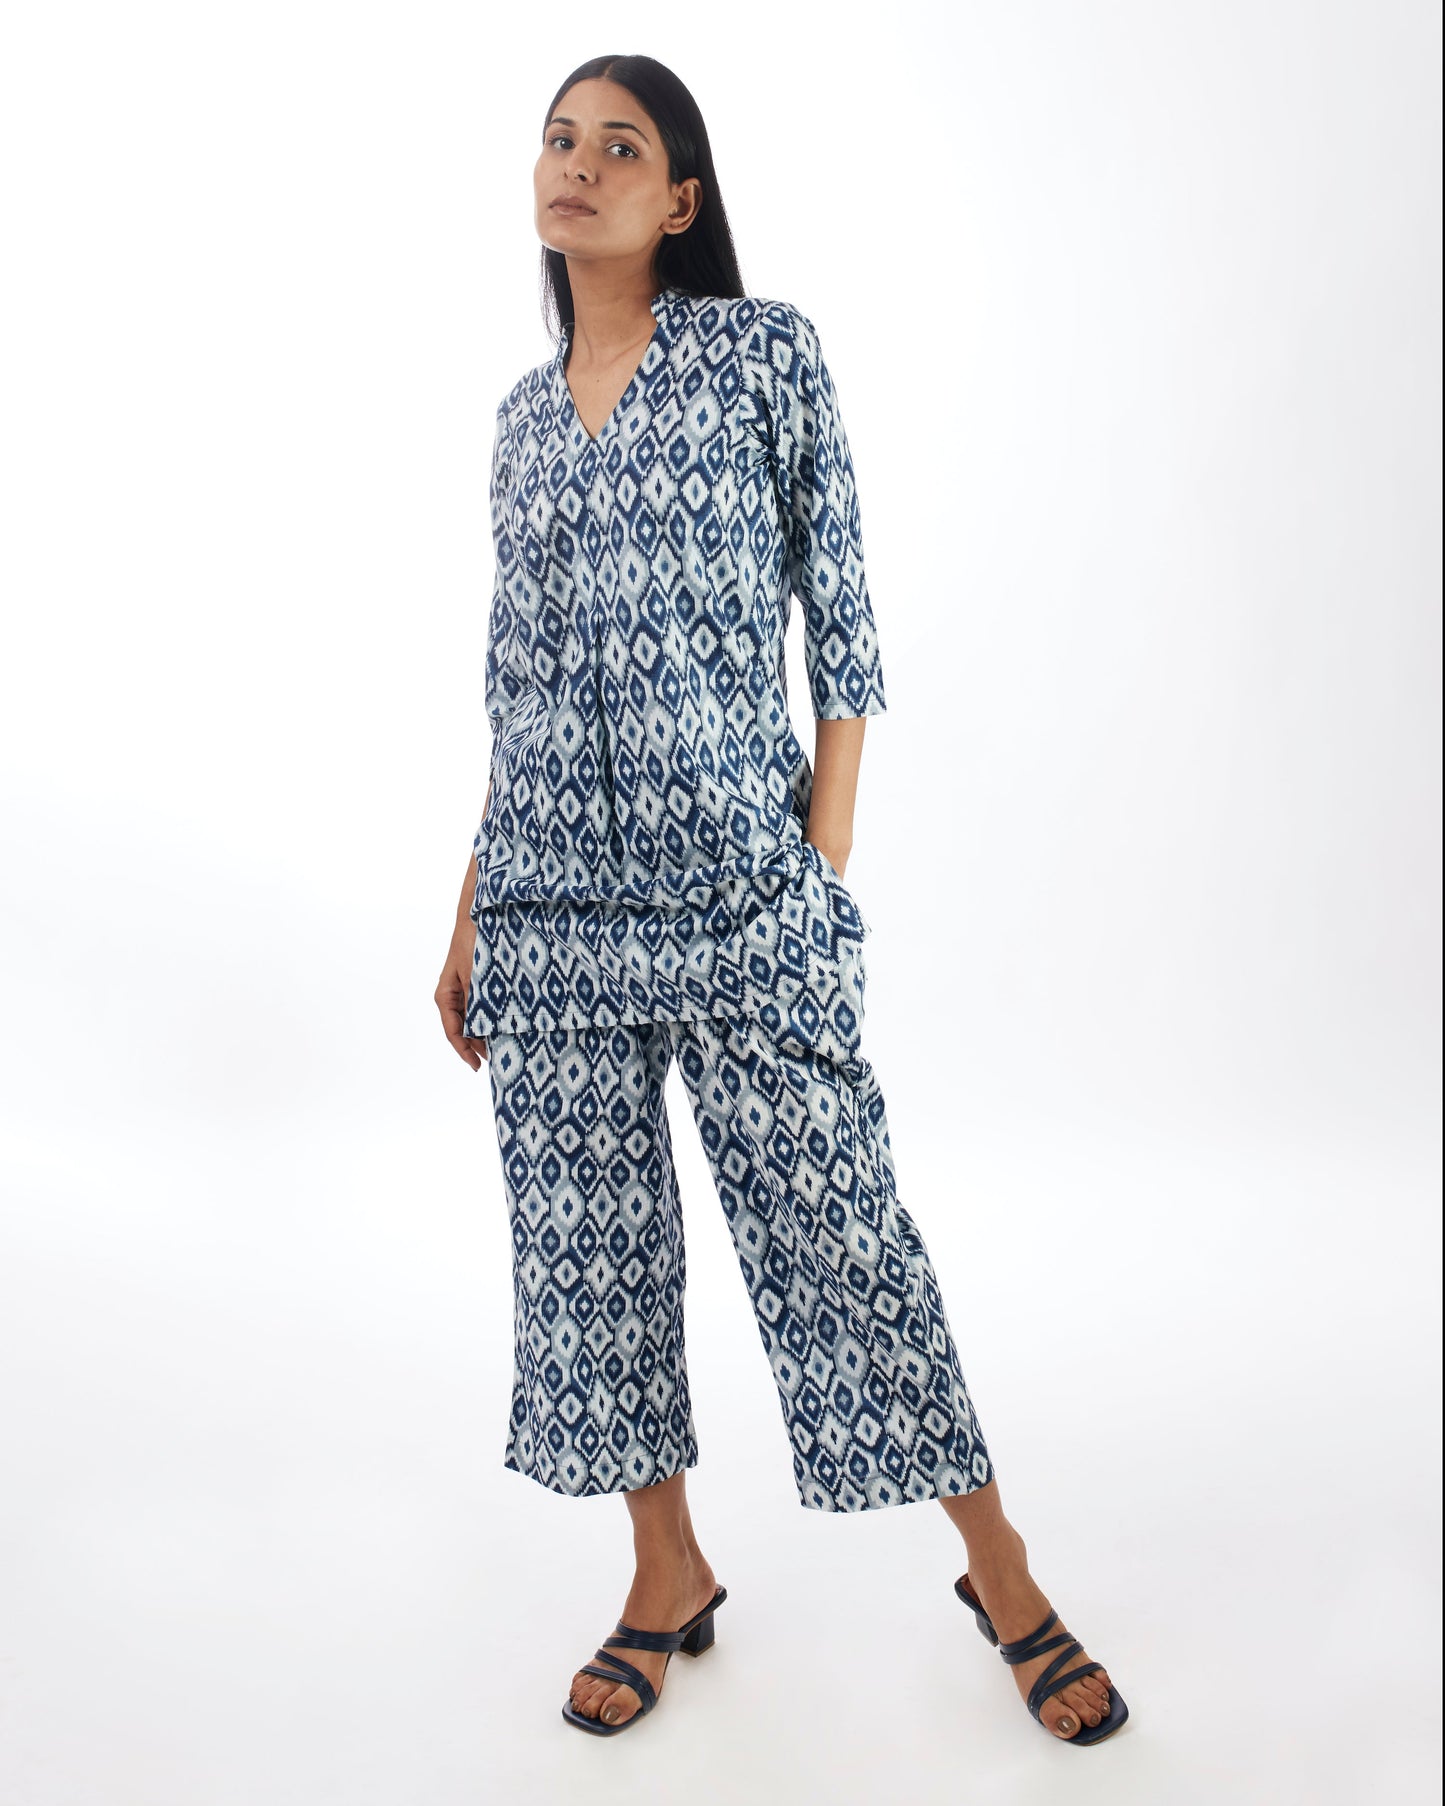 Blue Printed Top With White Pant Co-ord Set at Kamakhyaa by Kamakhyaa. This item is 100% pure cotton, Blue, Casual Wear, Co-ord Sets, KKYSS, Natural, Office, Office Wear Co-ords, Prints, Relaxed Fit, Summer Sutra, Womenswear